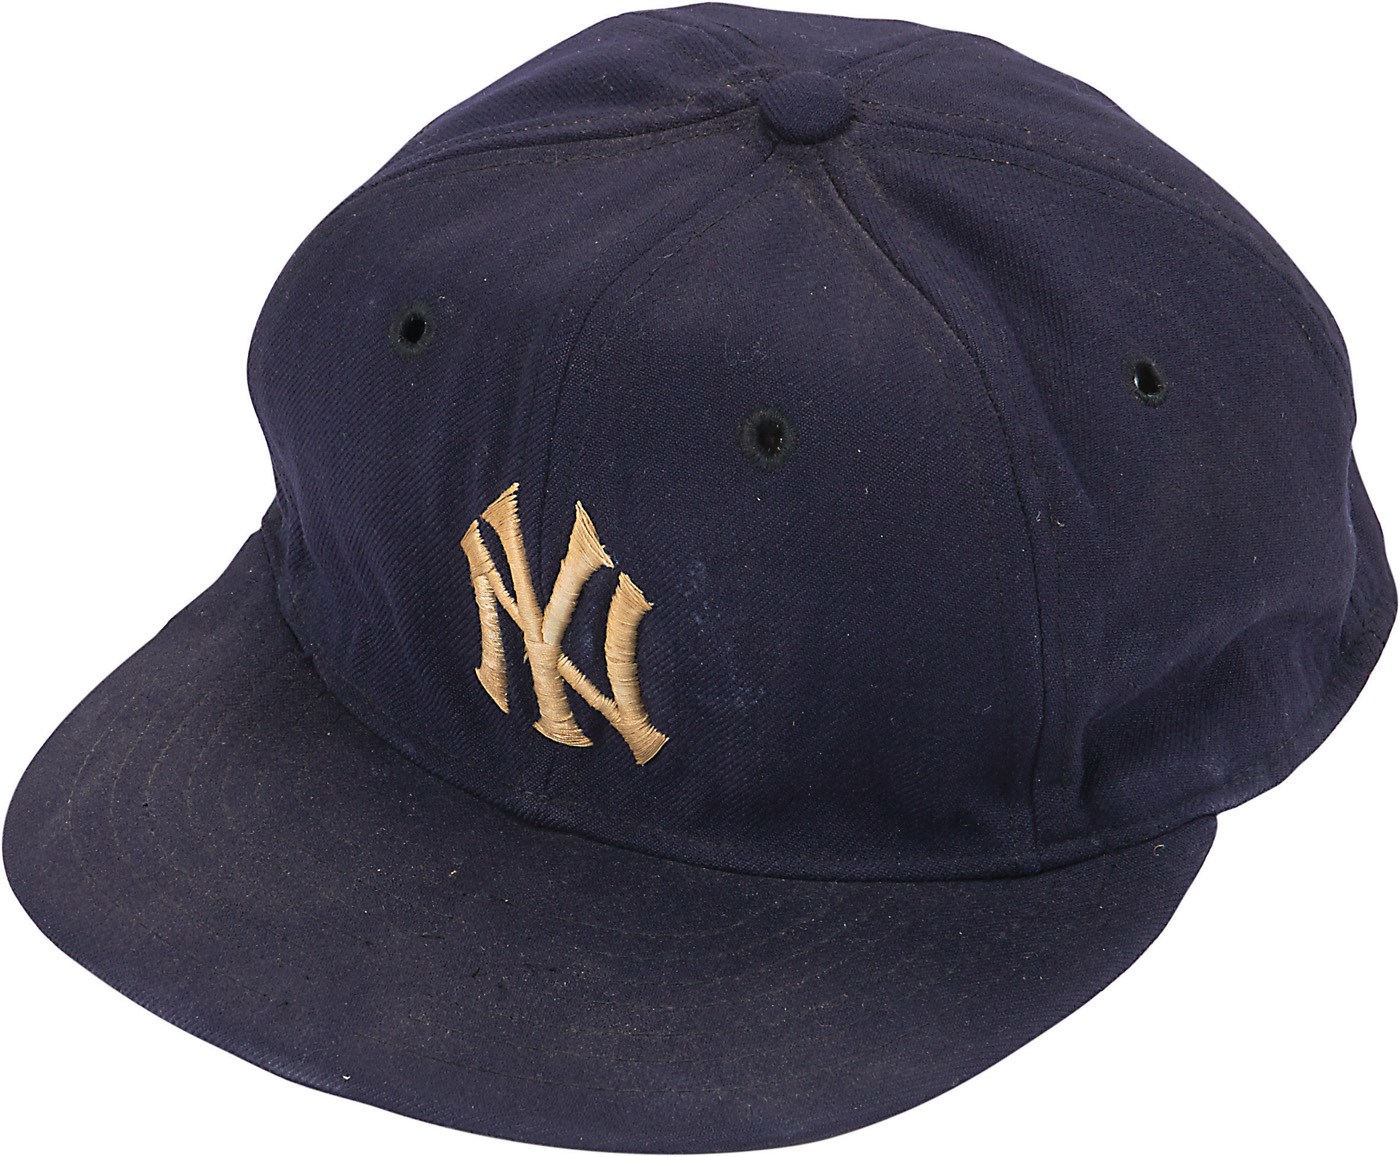 Mantle and Maris - Late 1950s/Early 1960s Mickey Mantle Game Used Cap from Pete Sheehy (MEARS)